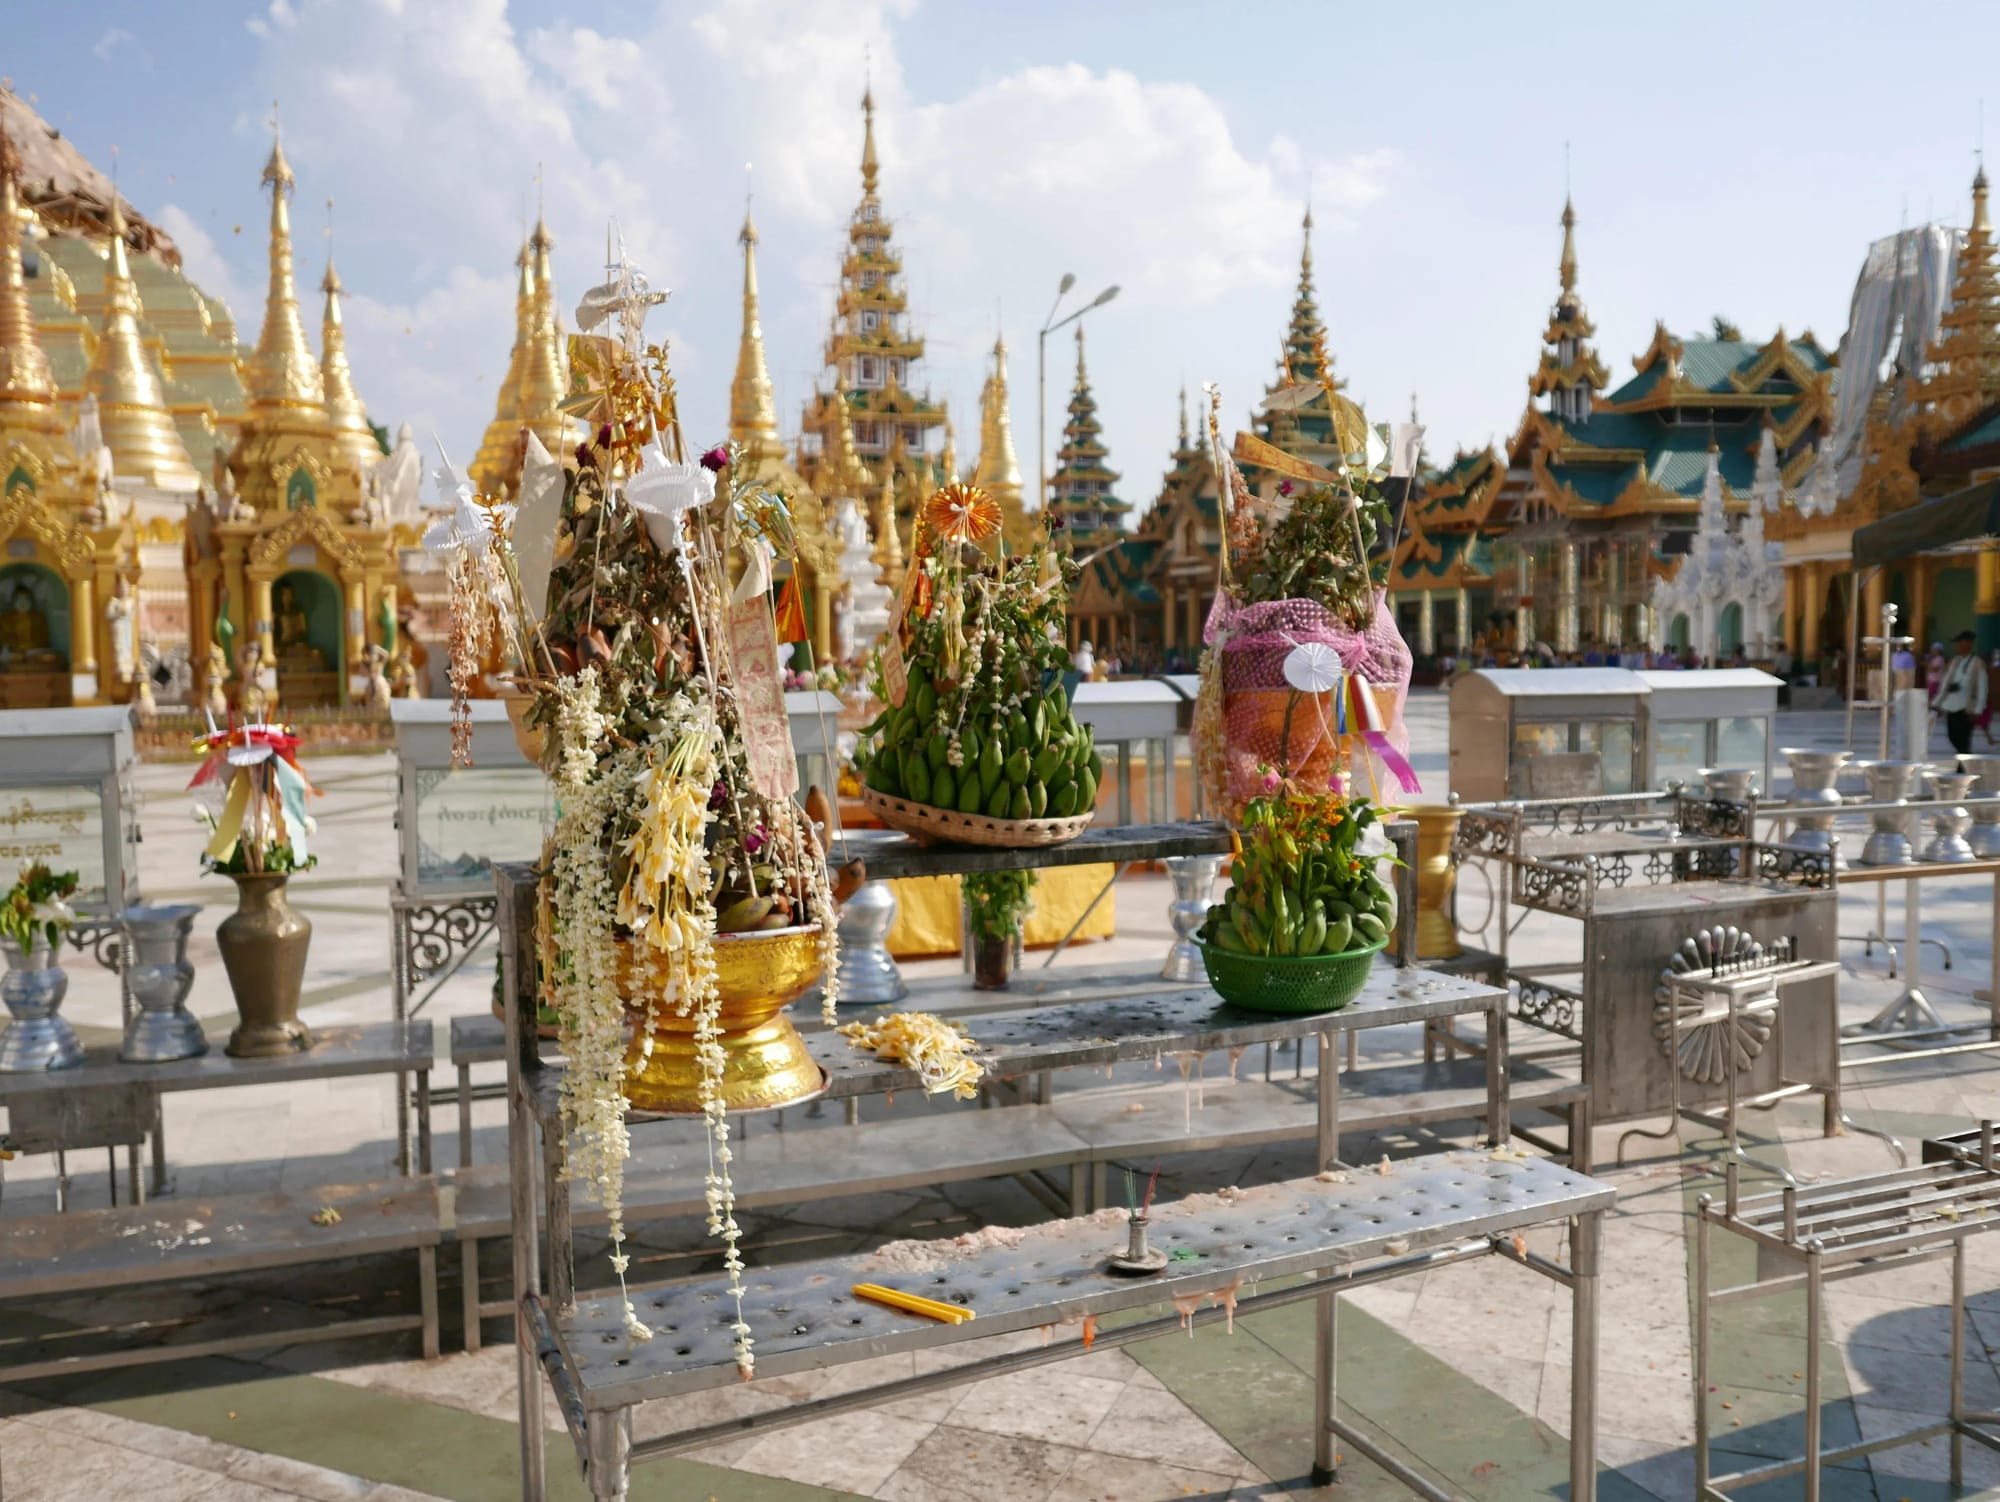 Photo by Author — offerings at the Shwedagon Pagoda